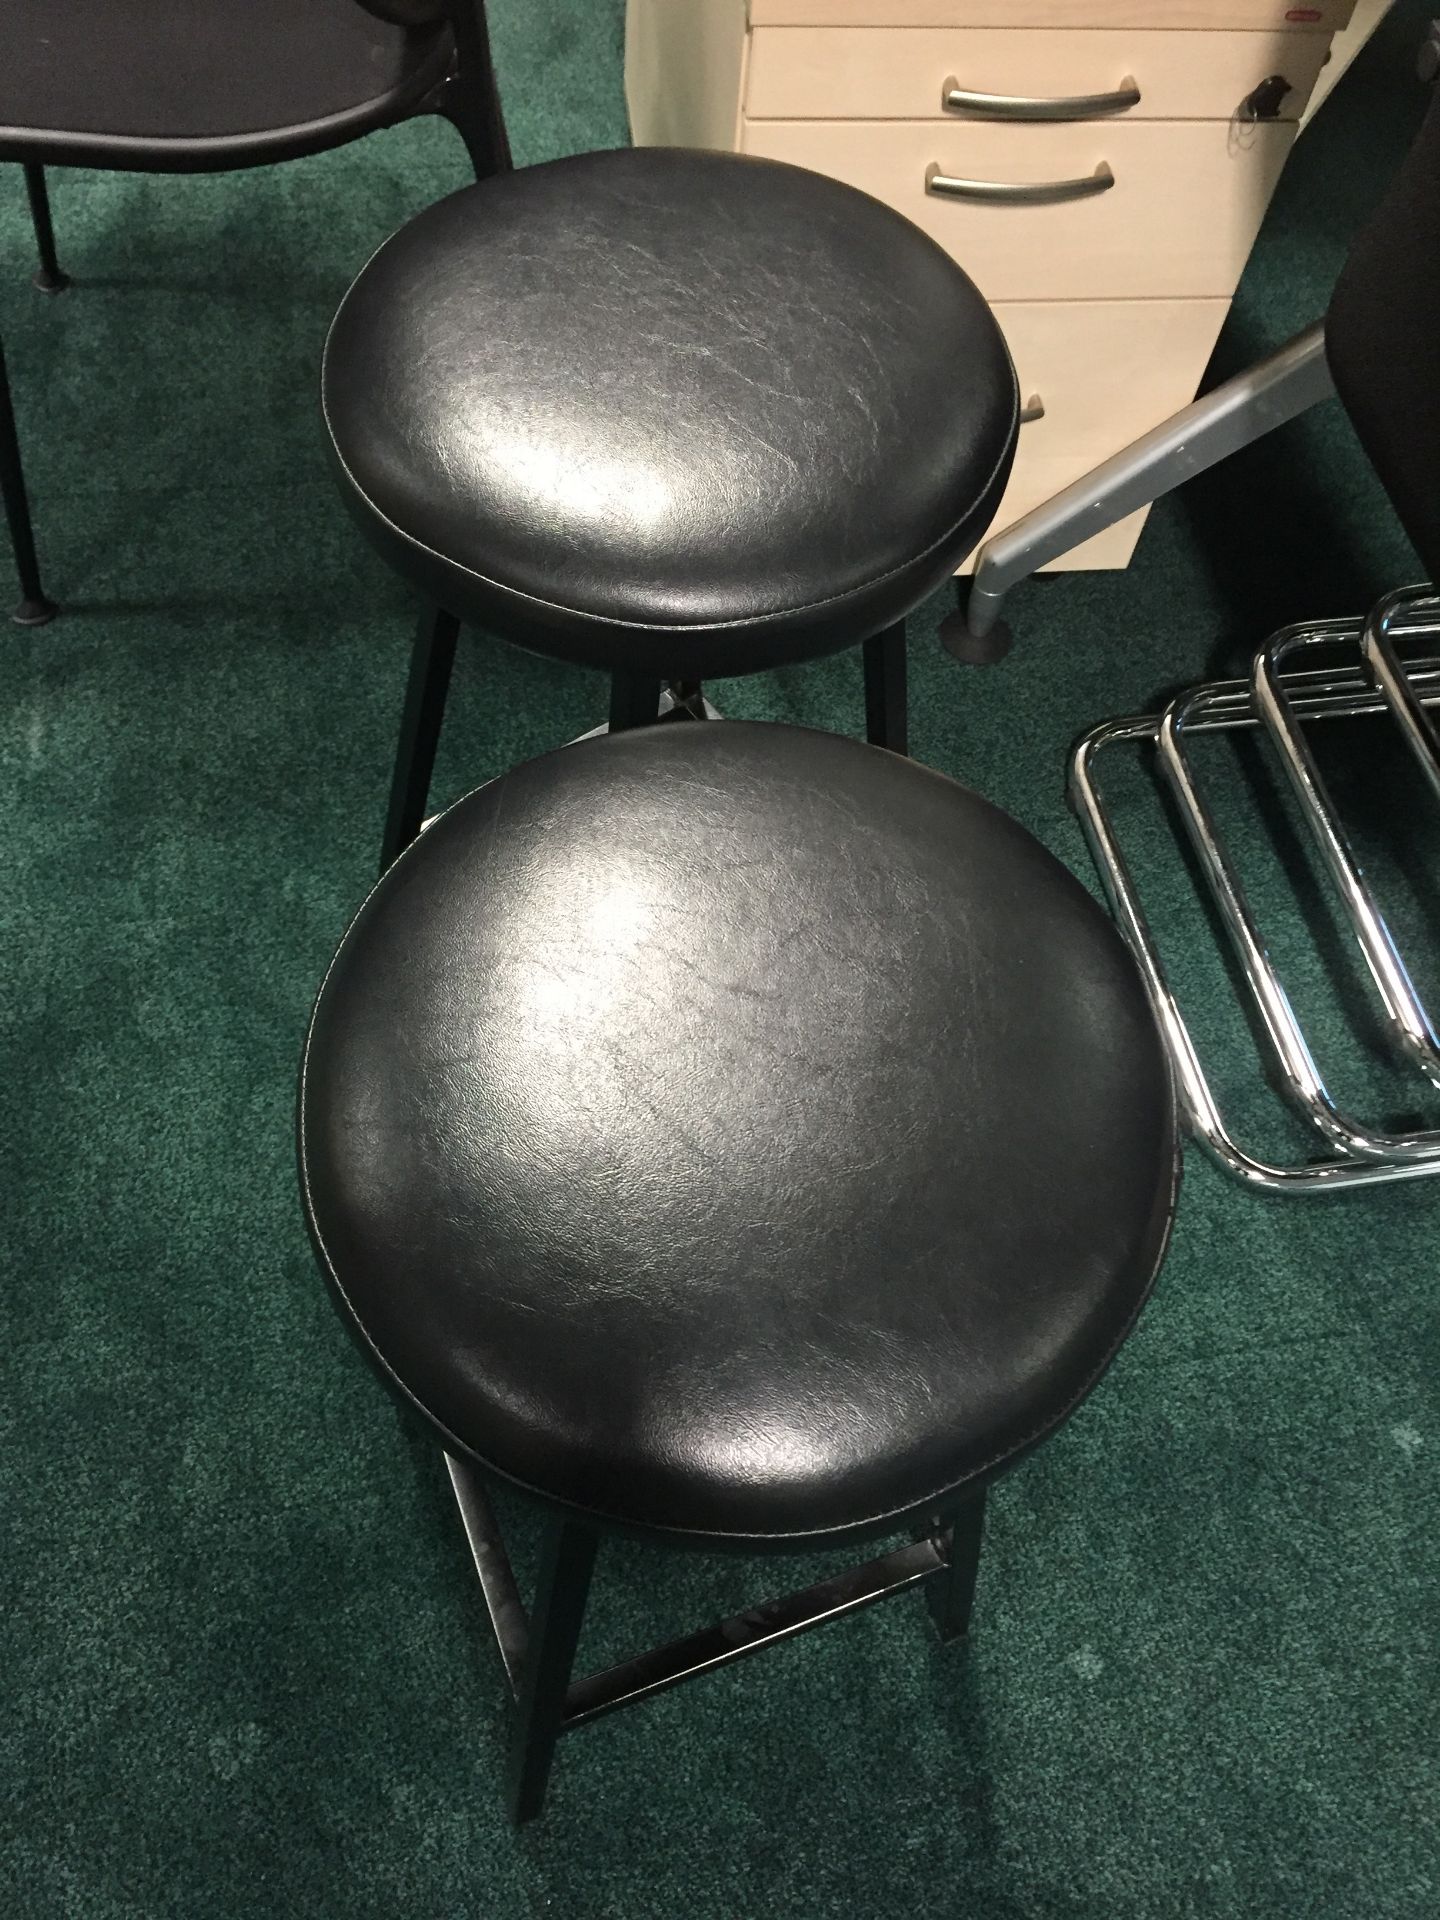 2 x Contemporary Black Bar Stools With Leather Cushioned Seats - Excellent Condition - CL198 - - Image 3 of 3